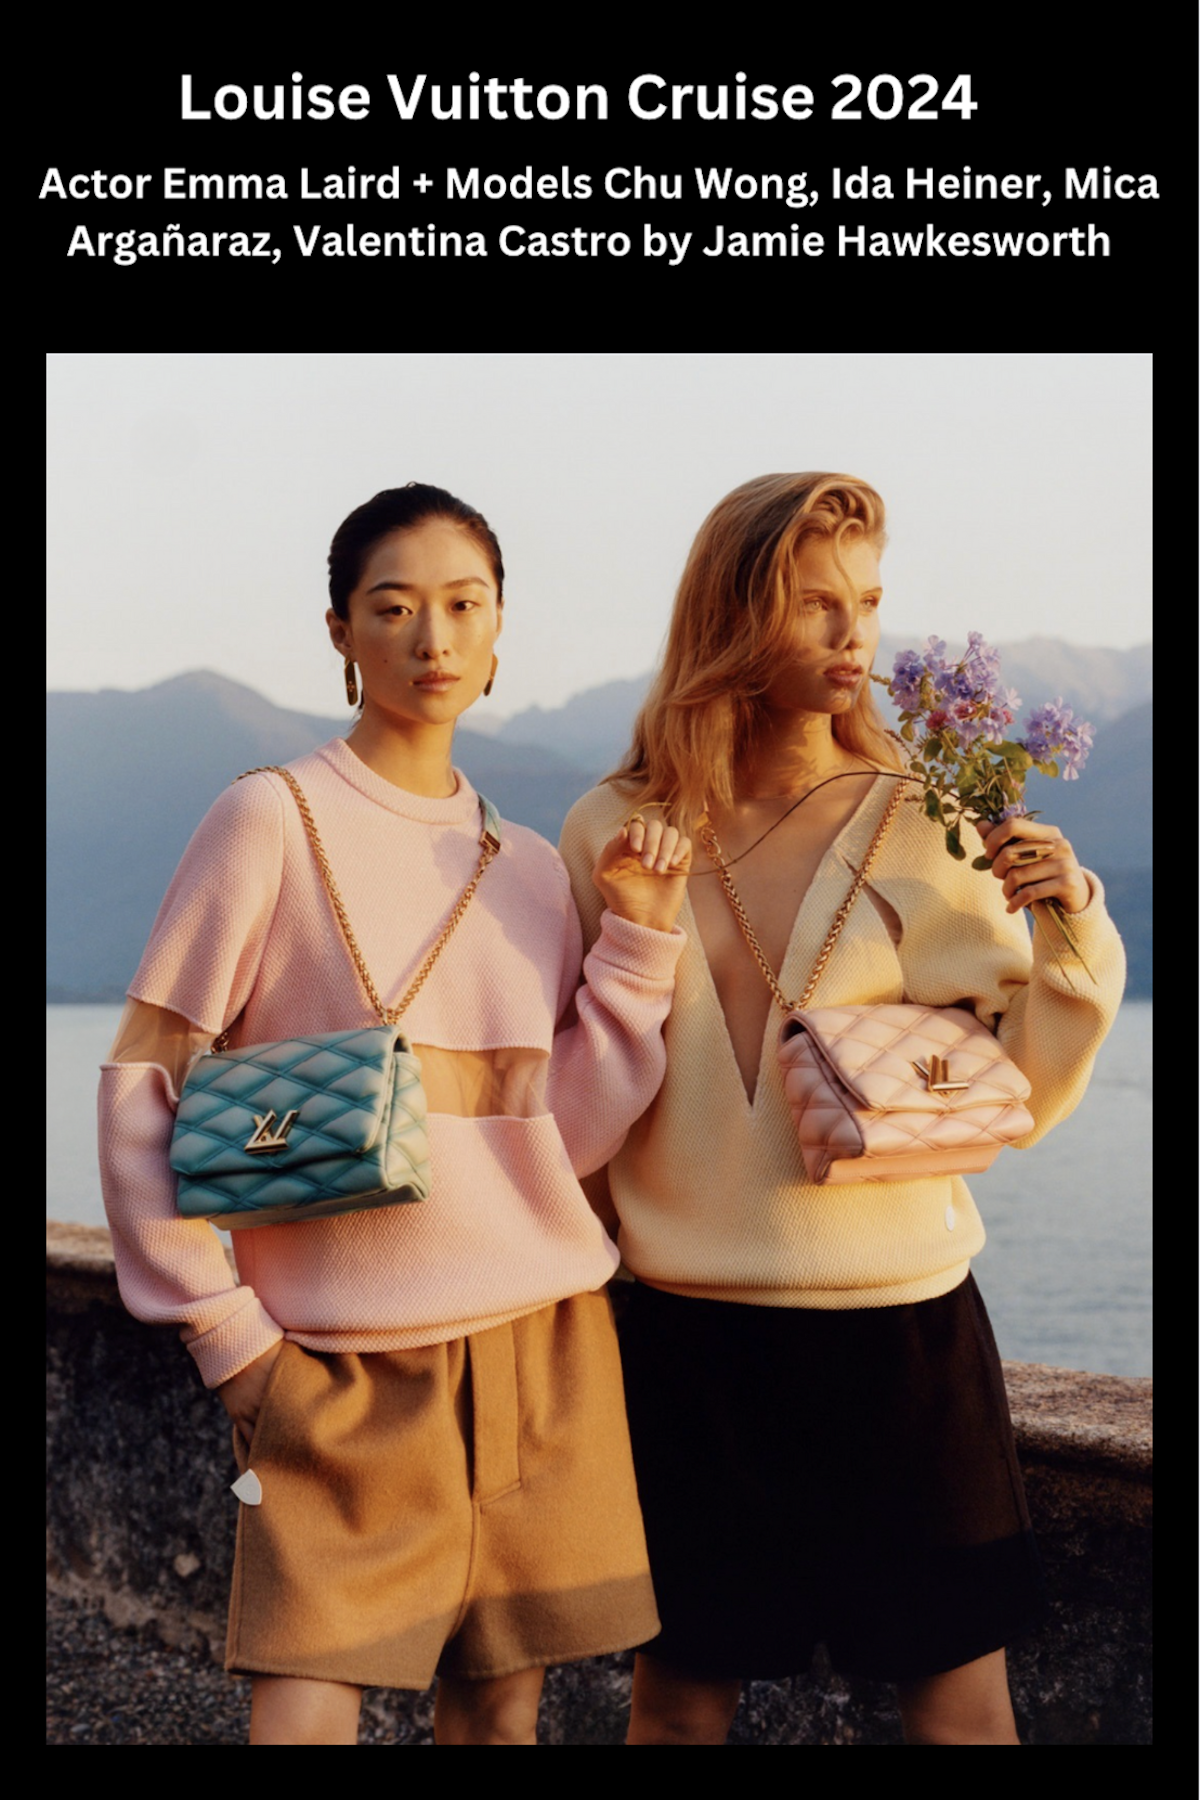 Louis-Vuitton-Cruise-2024-by-Jamie-Hawkesworth-11.png